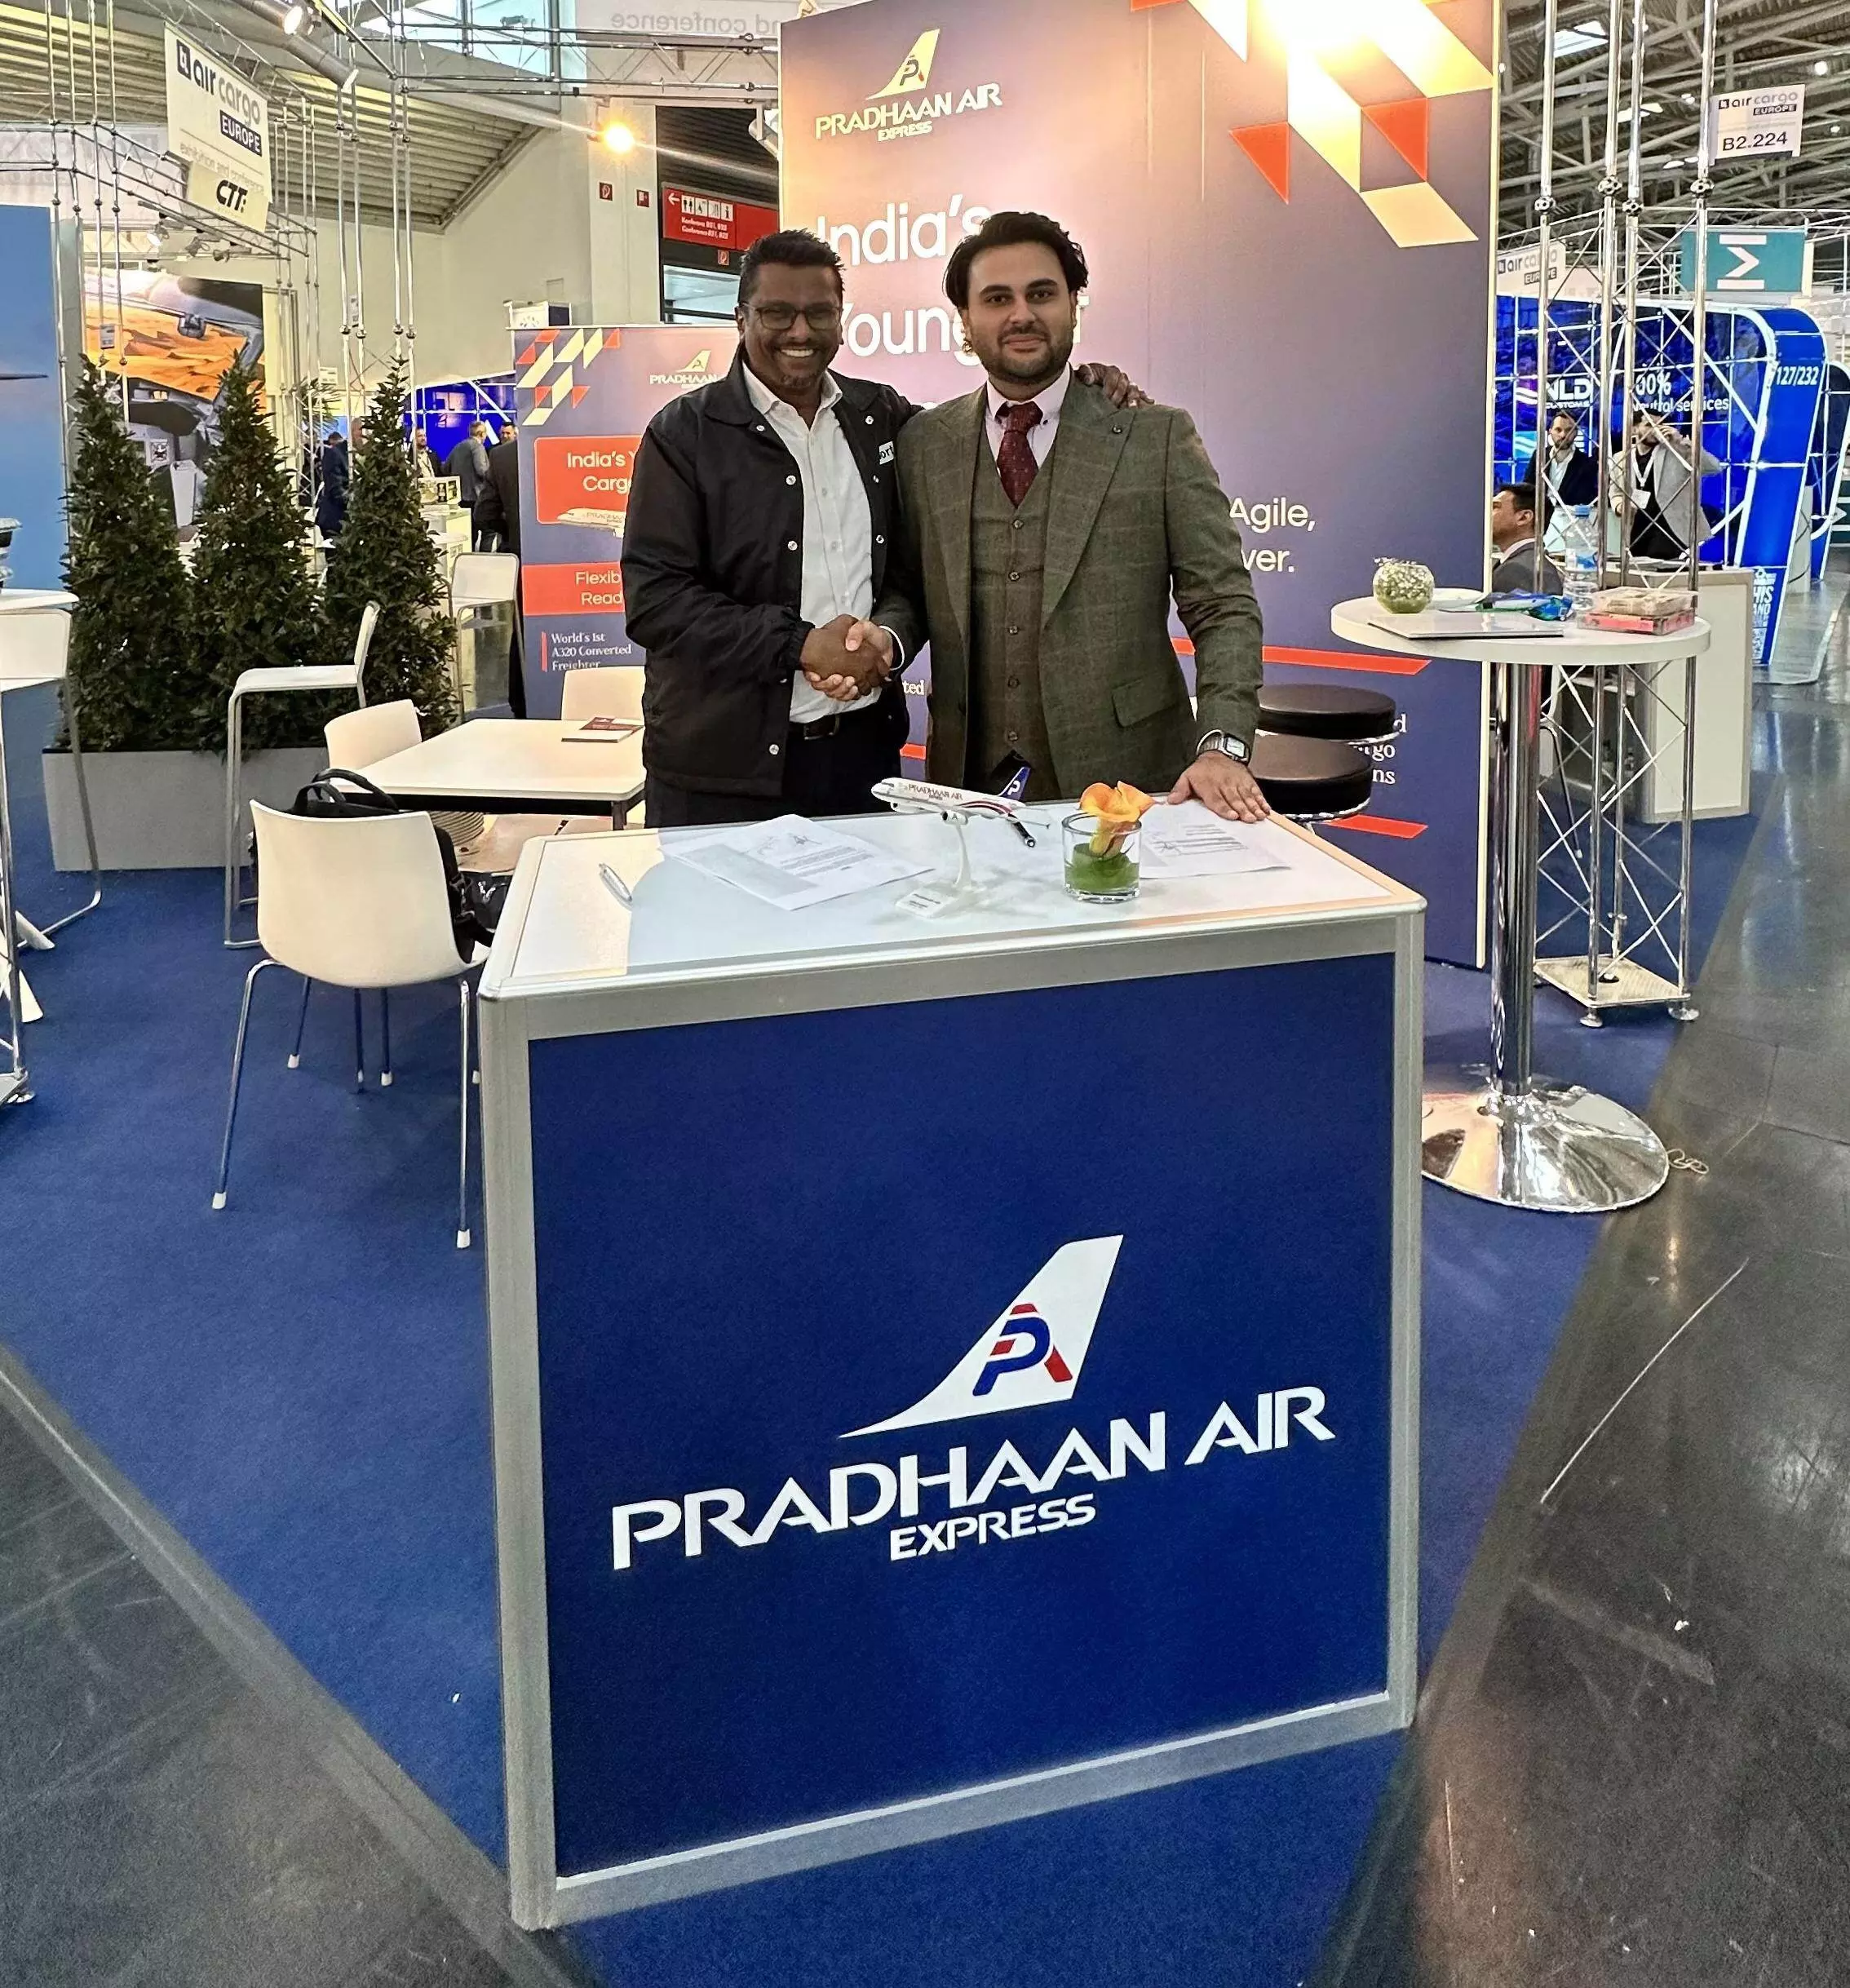 Francis Antony, Group Head Cargo Commercial, Teleport and Nipun Anand, founder and CEO, Pradhaan Air Express signing the MoU at air cargo Europe in Munich